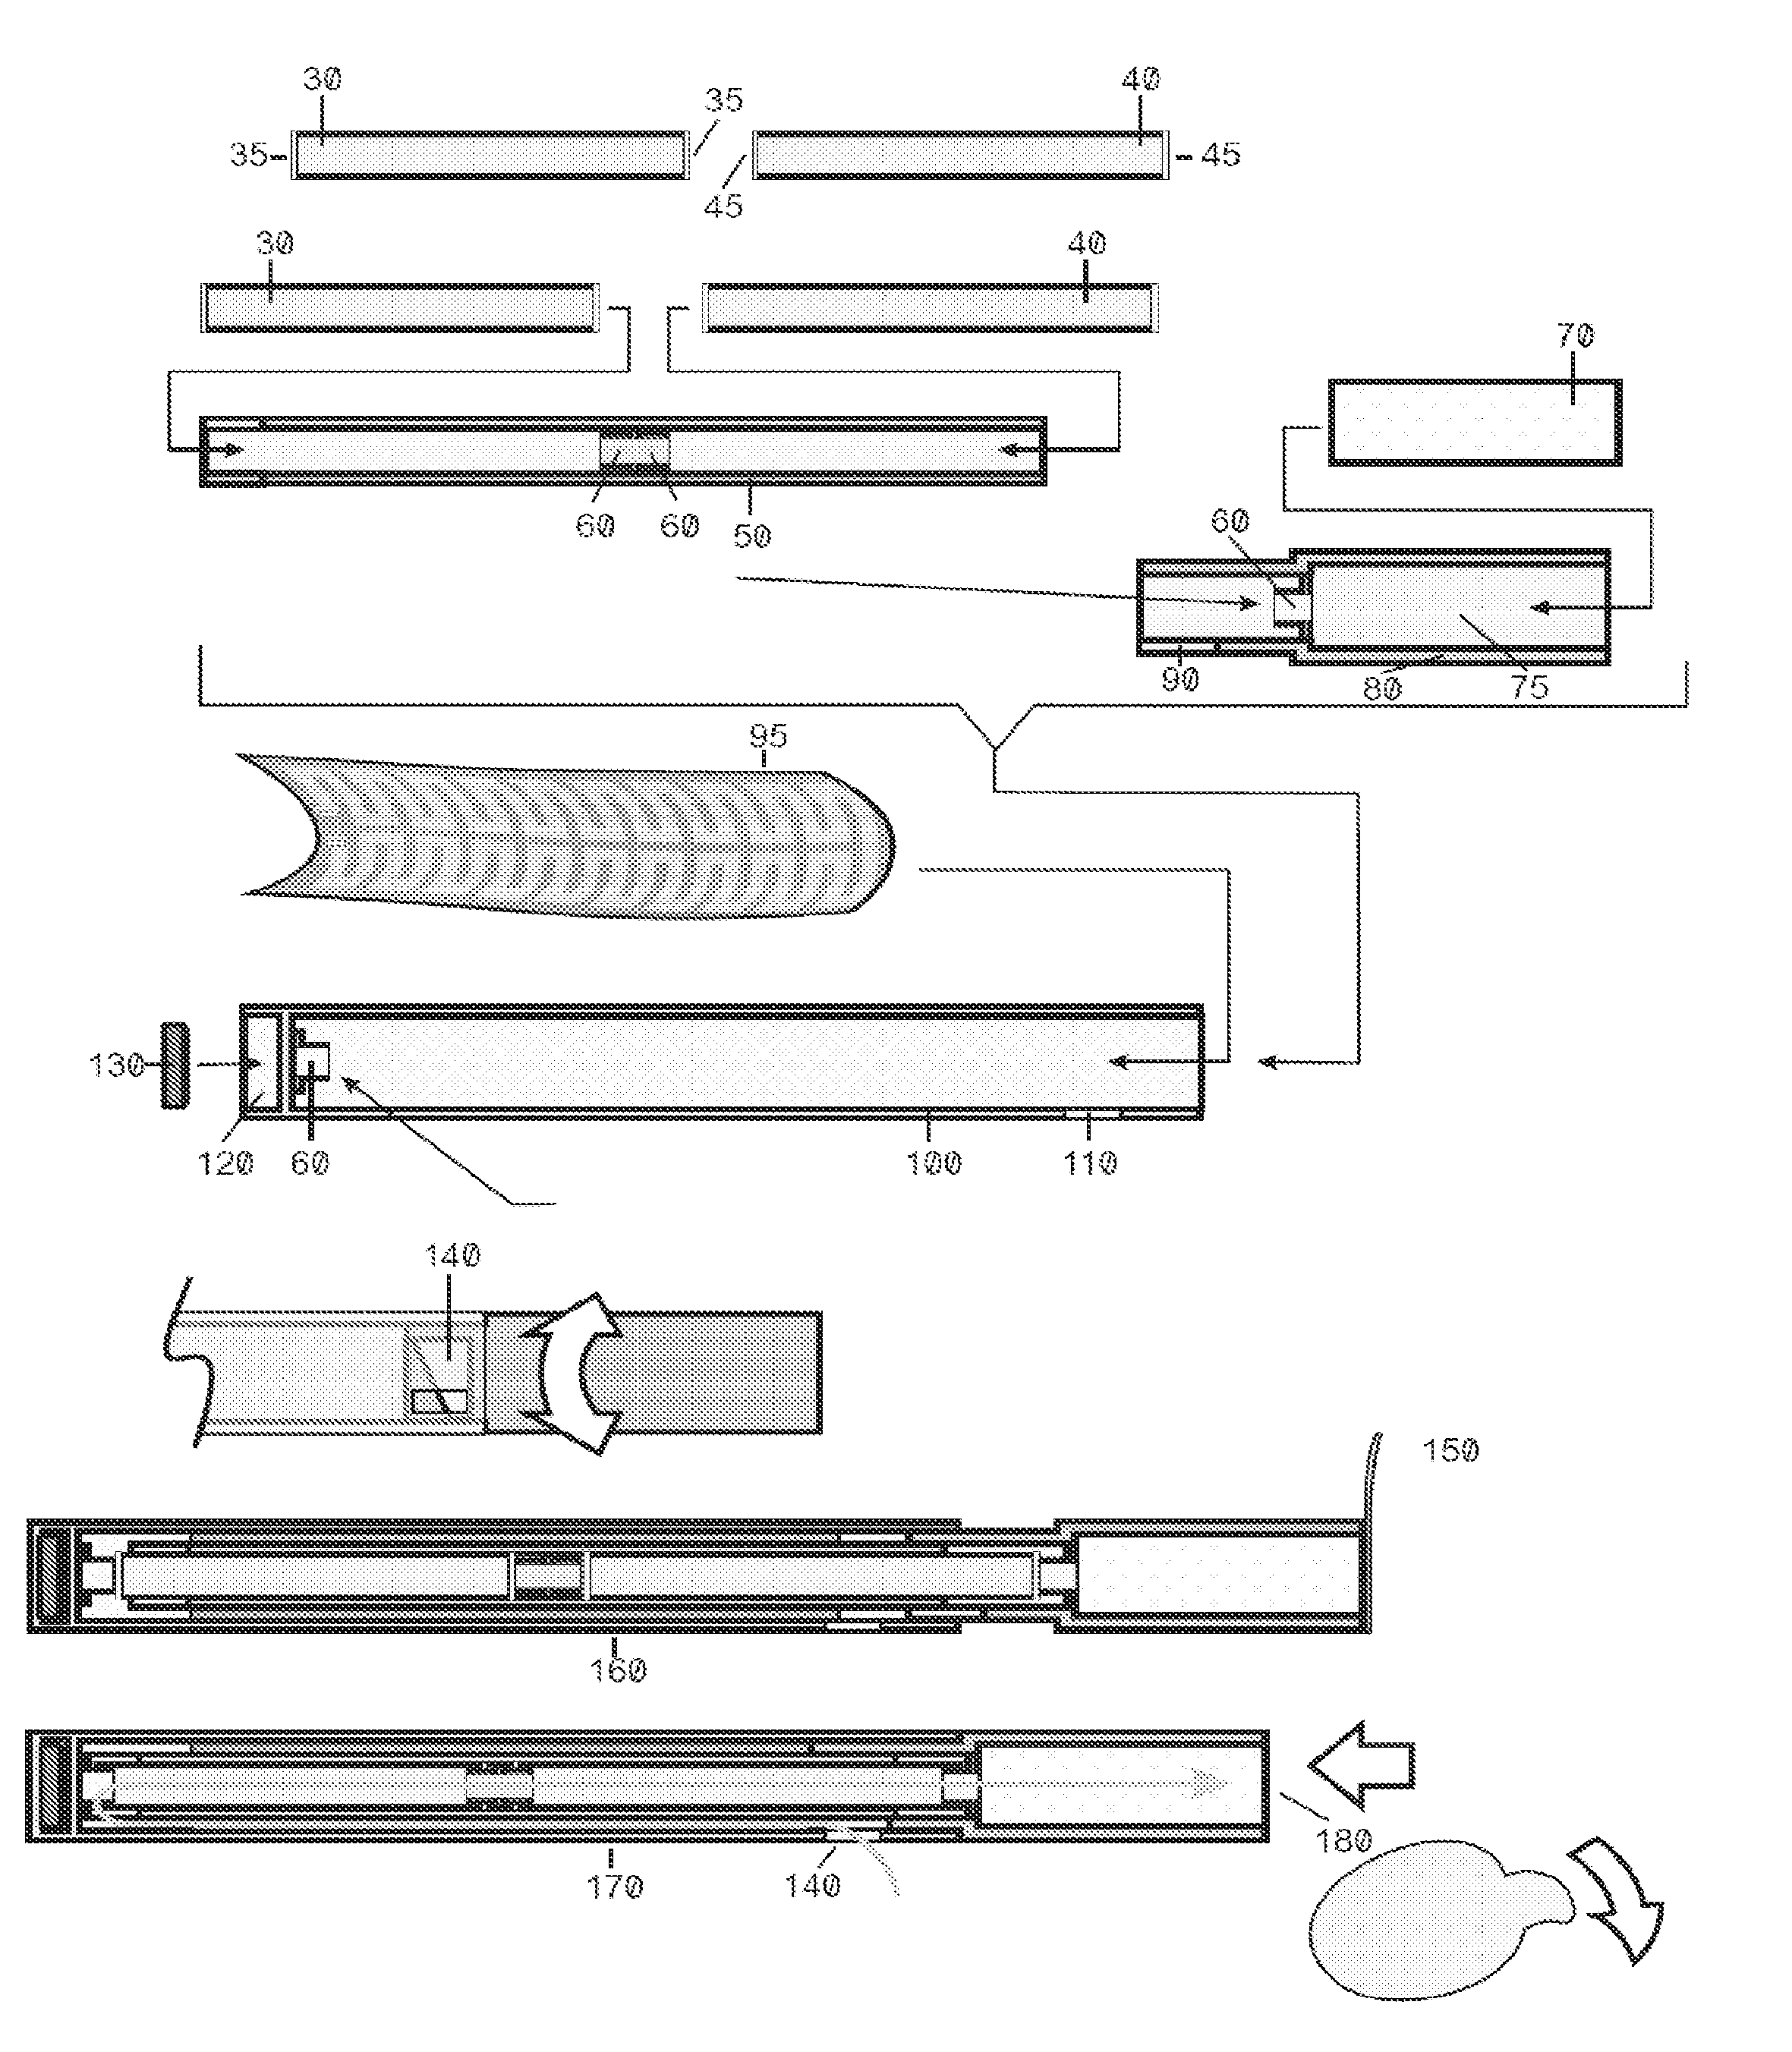 Improved  device and method for delivery of a medicament